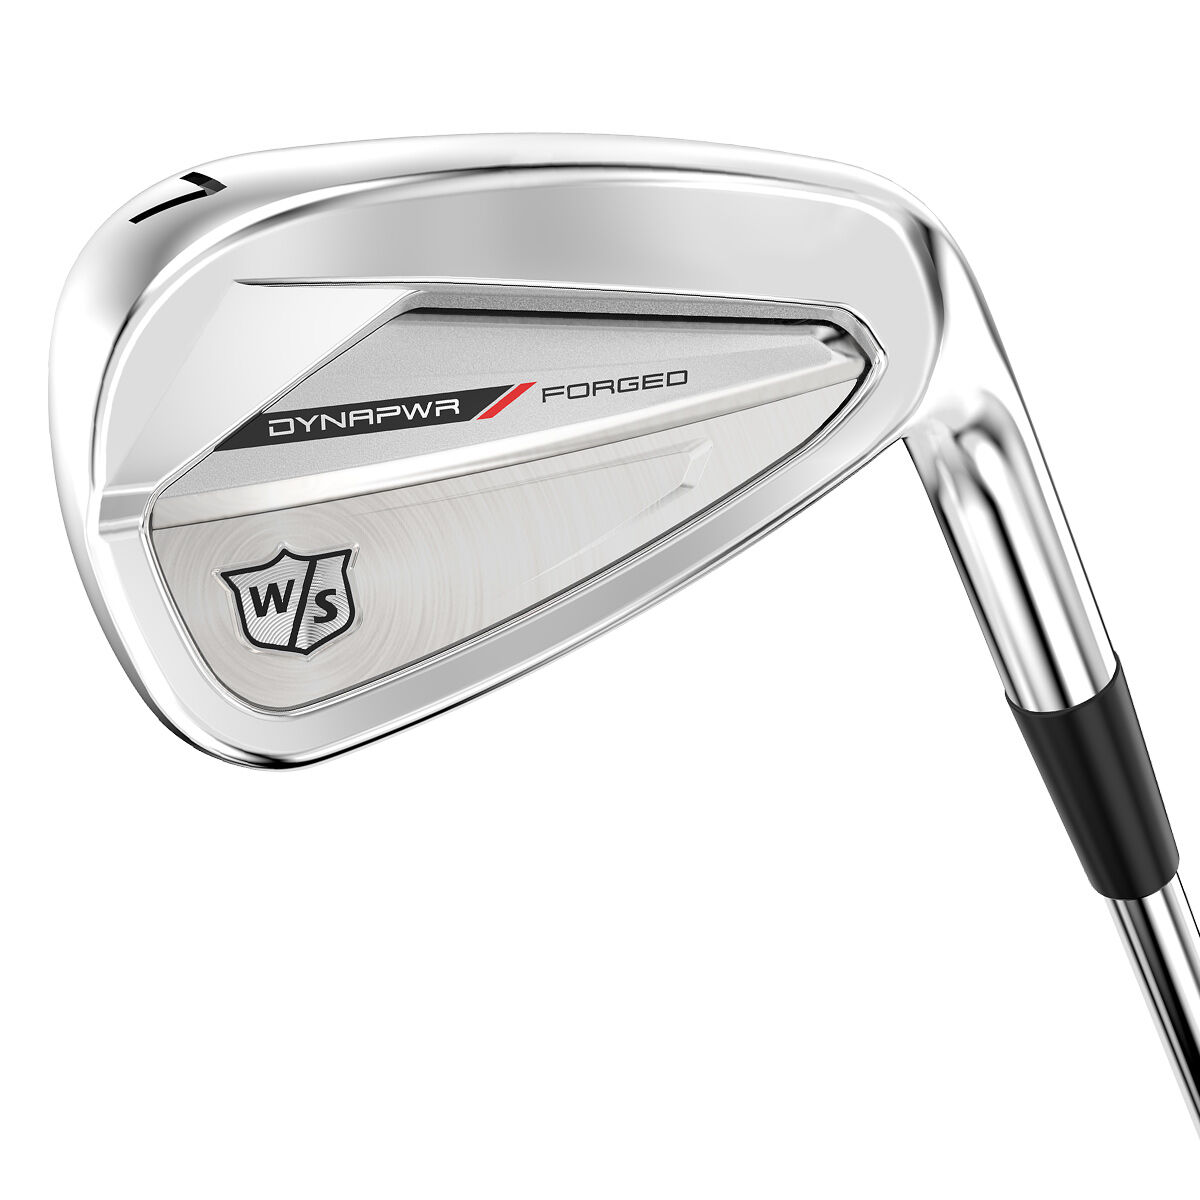 Wilson Staff Wilson Dynapower Forged Graphite Golf Irons - Custom Fit, Male | American Golf